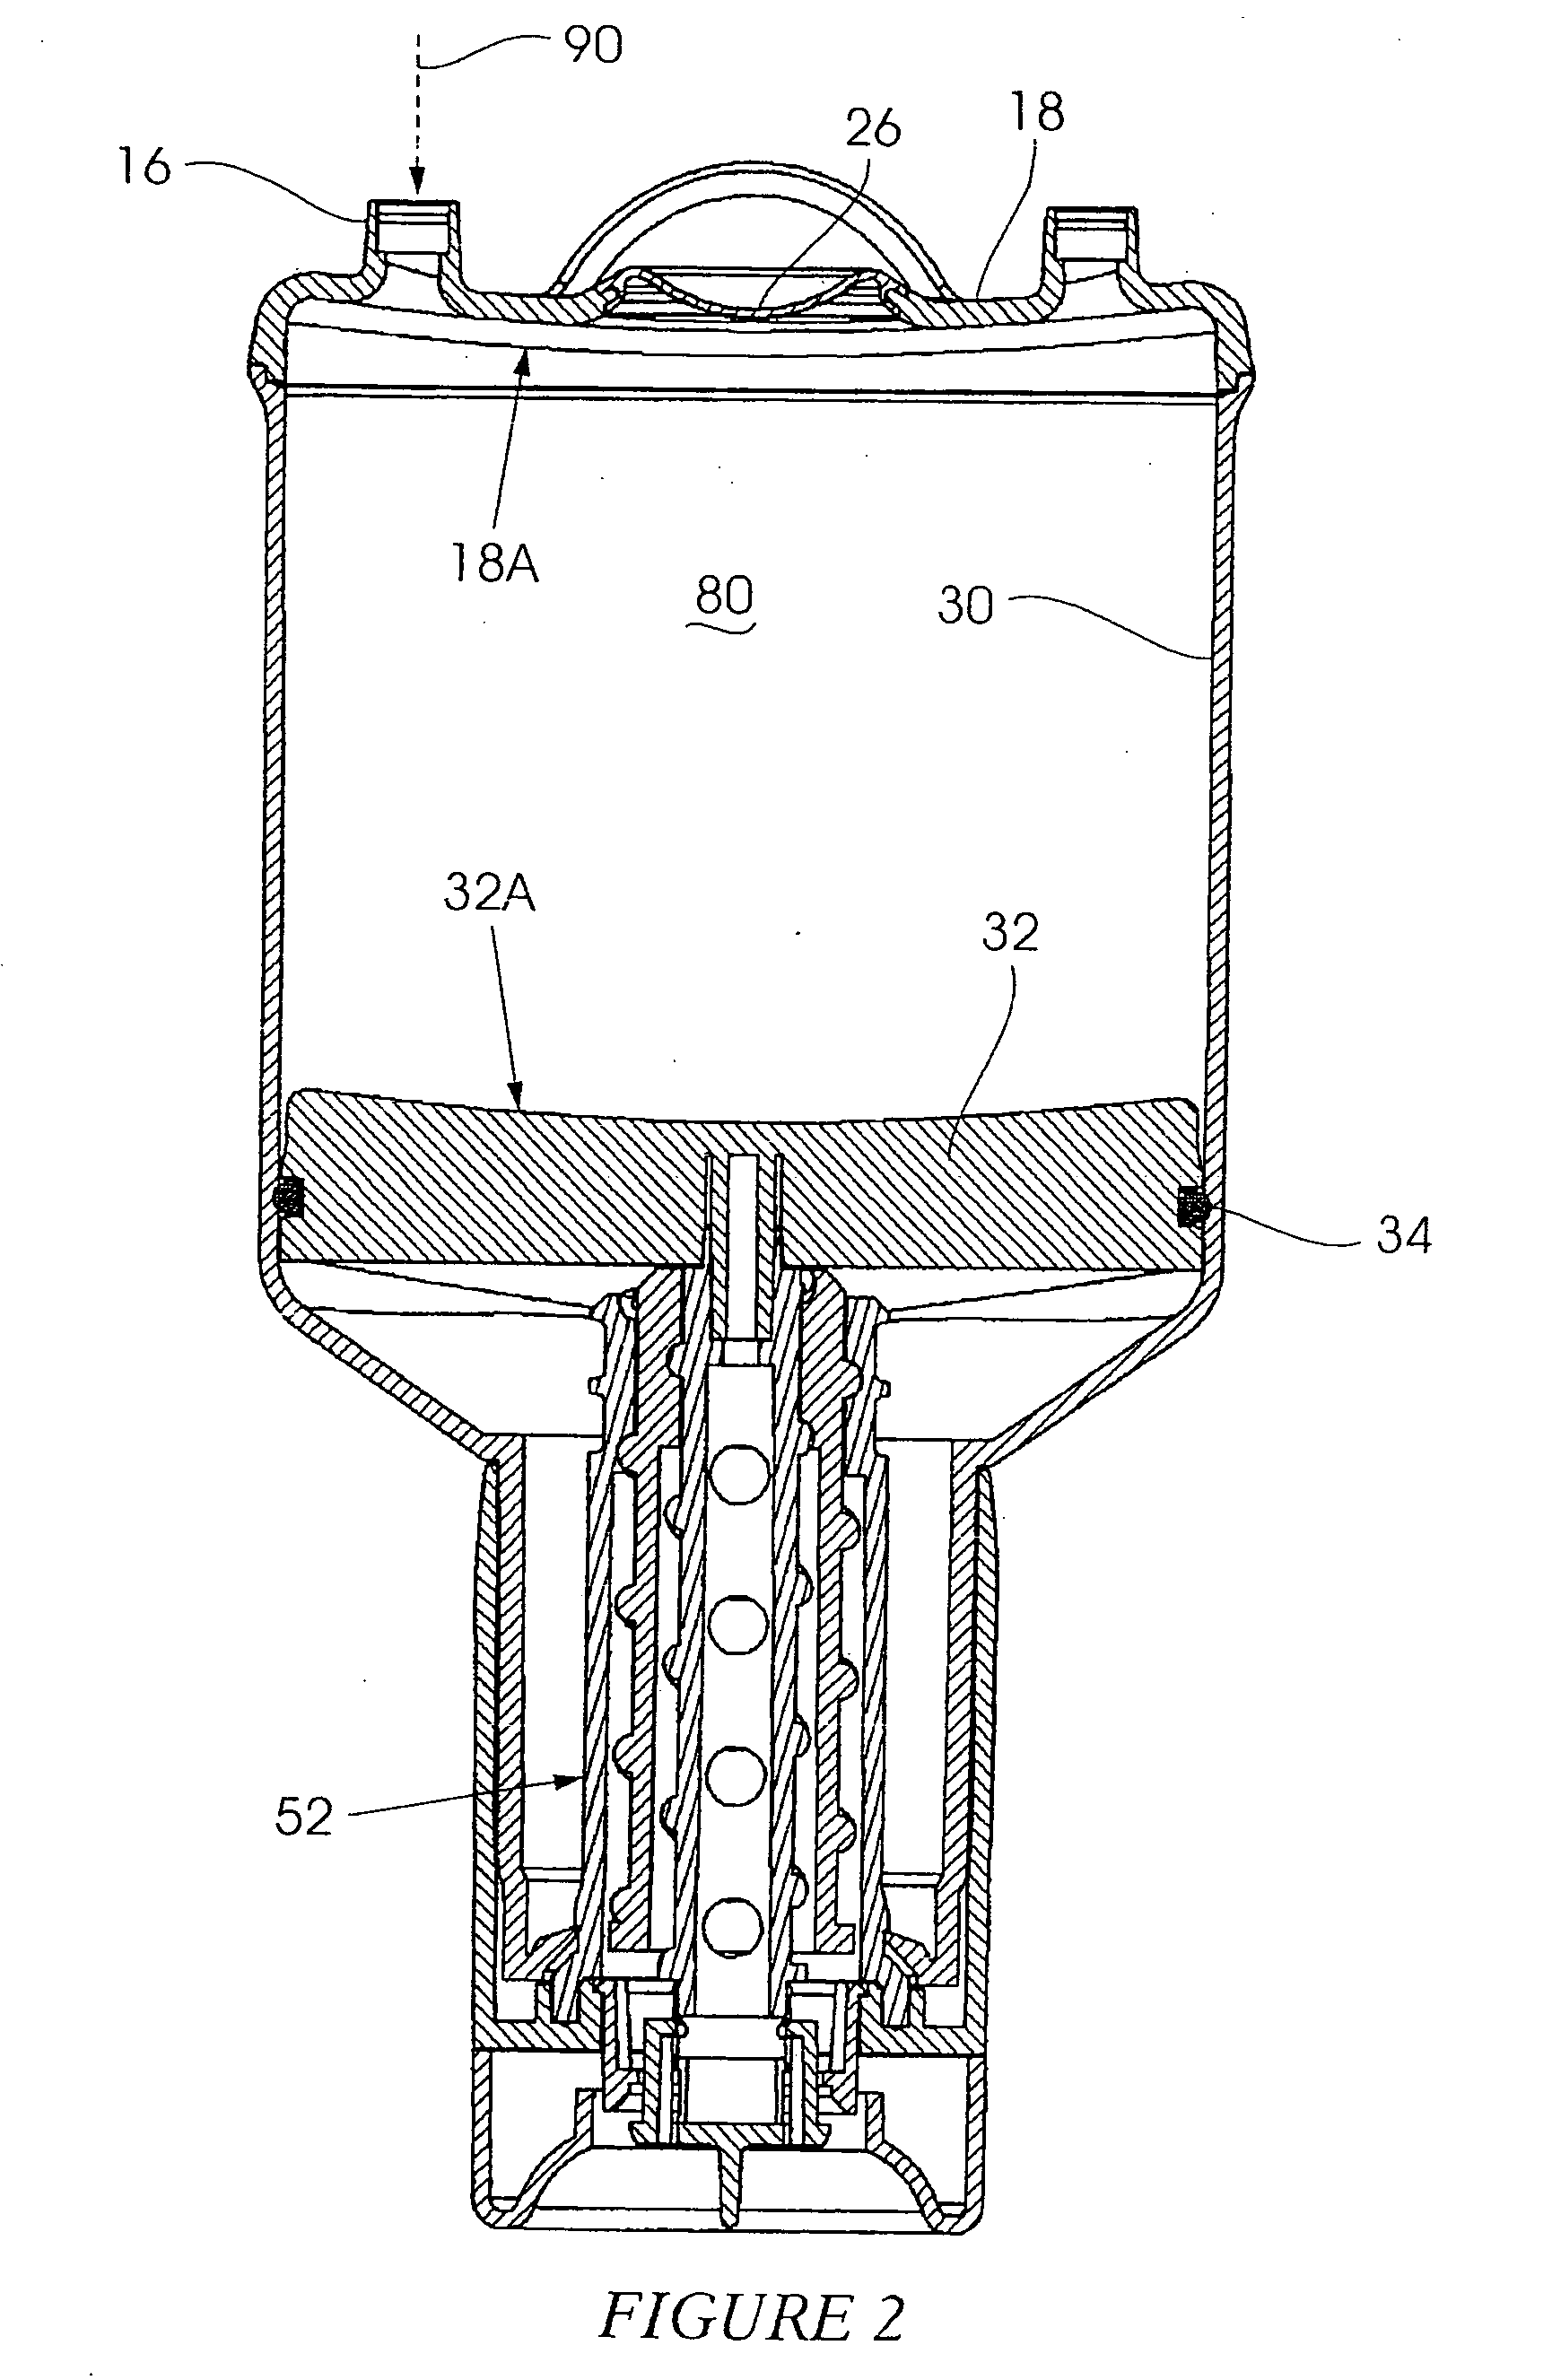 Closed wound drainage system